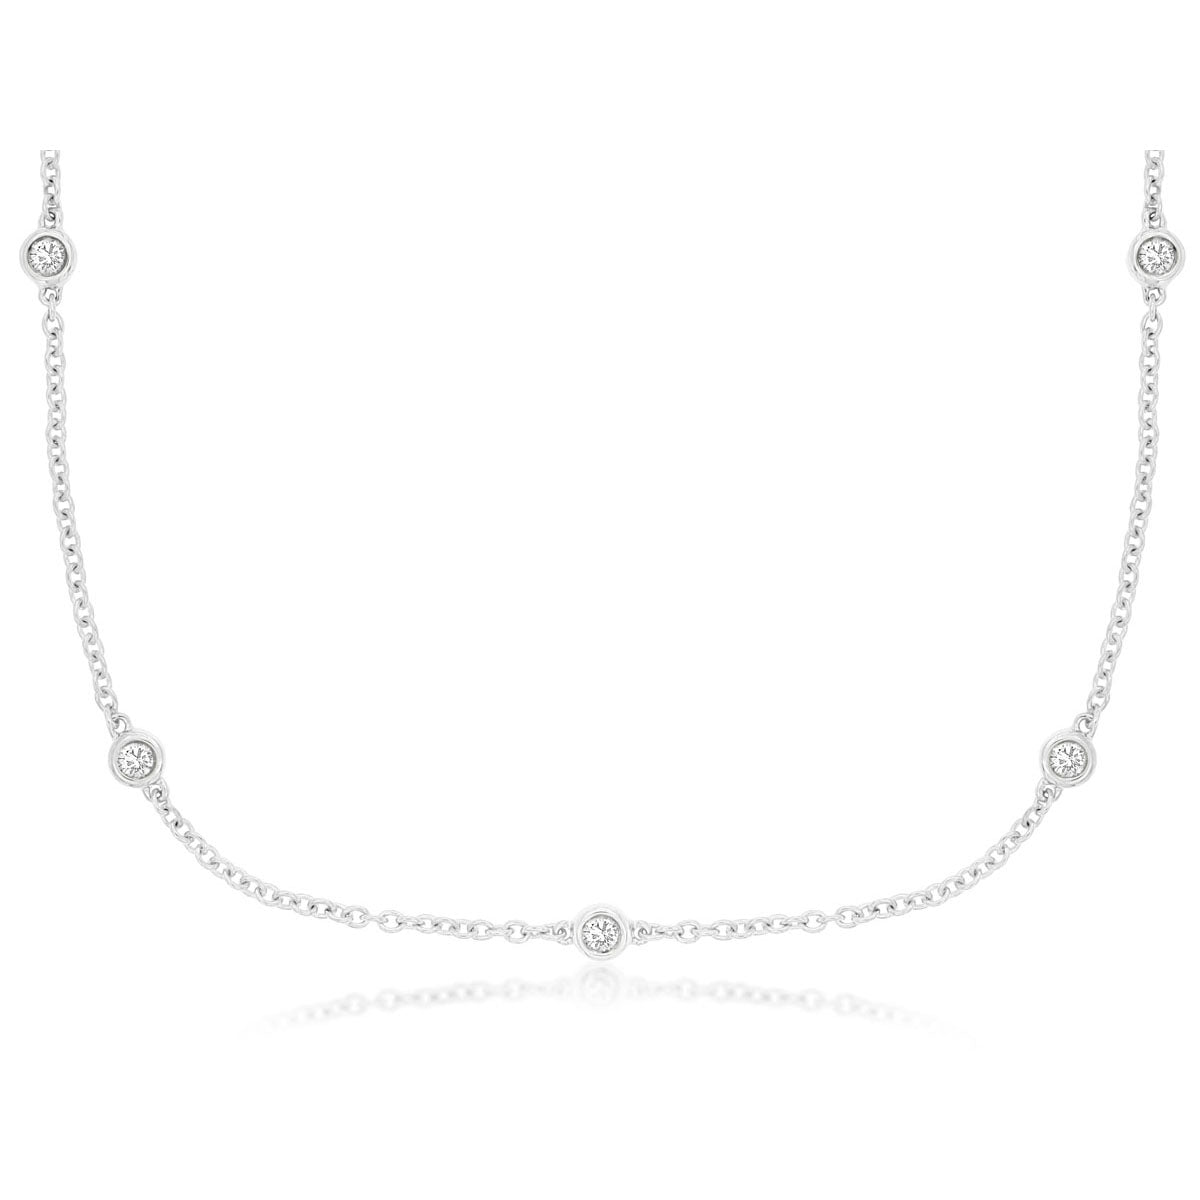 14kw Diamond By the Yard Necklace 0.20ctw